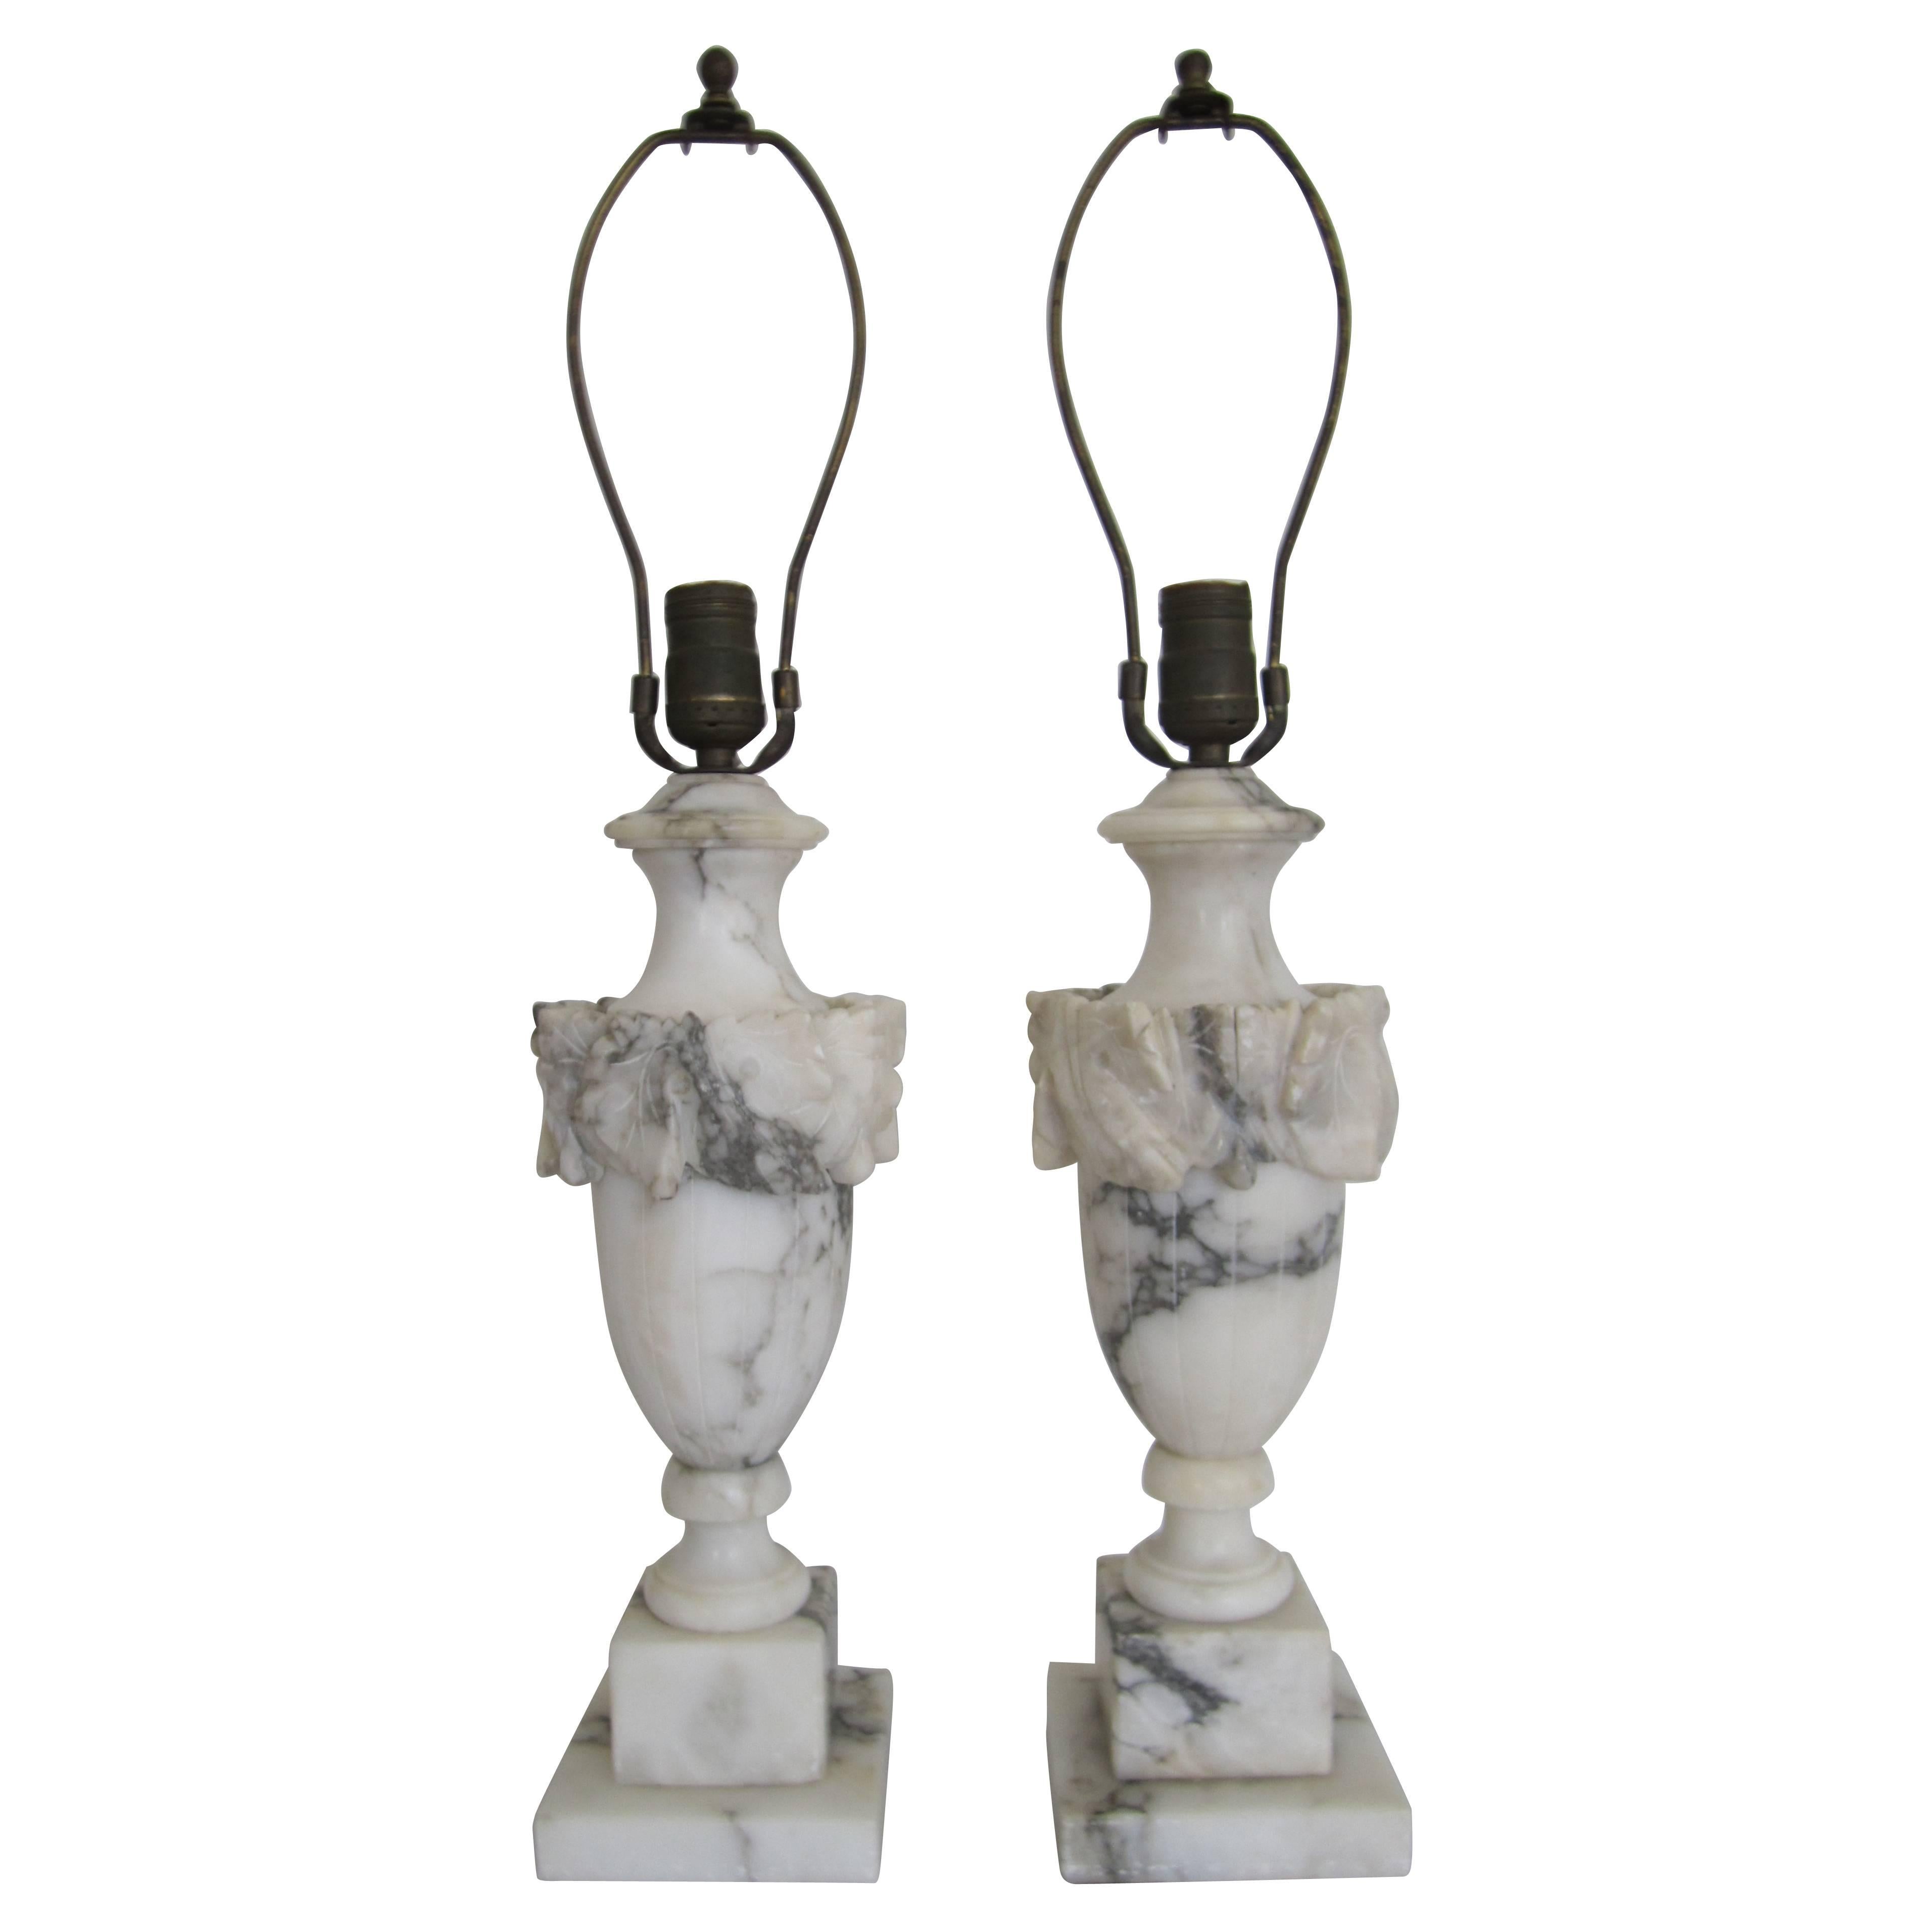 Italian Neoclassical Solid Black and White Marble Urn Table Lamps